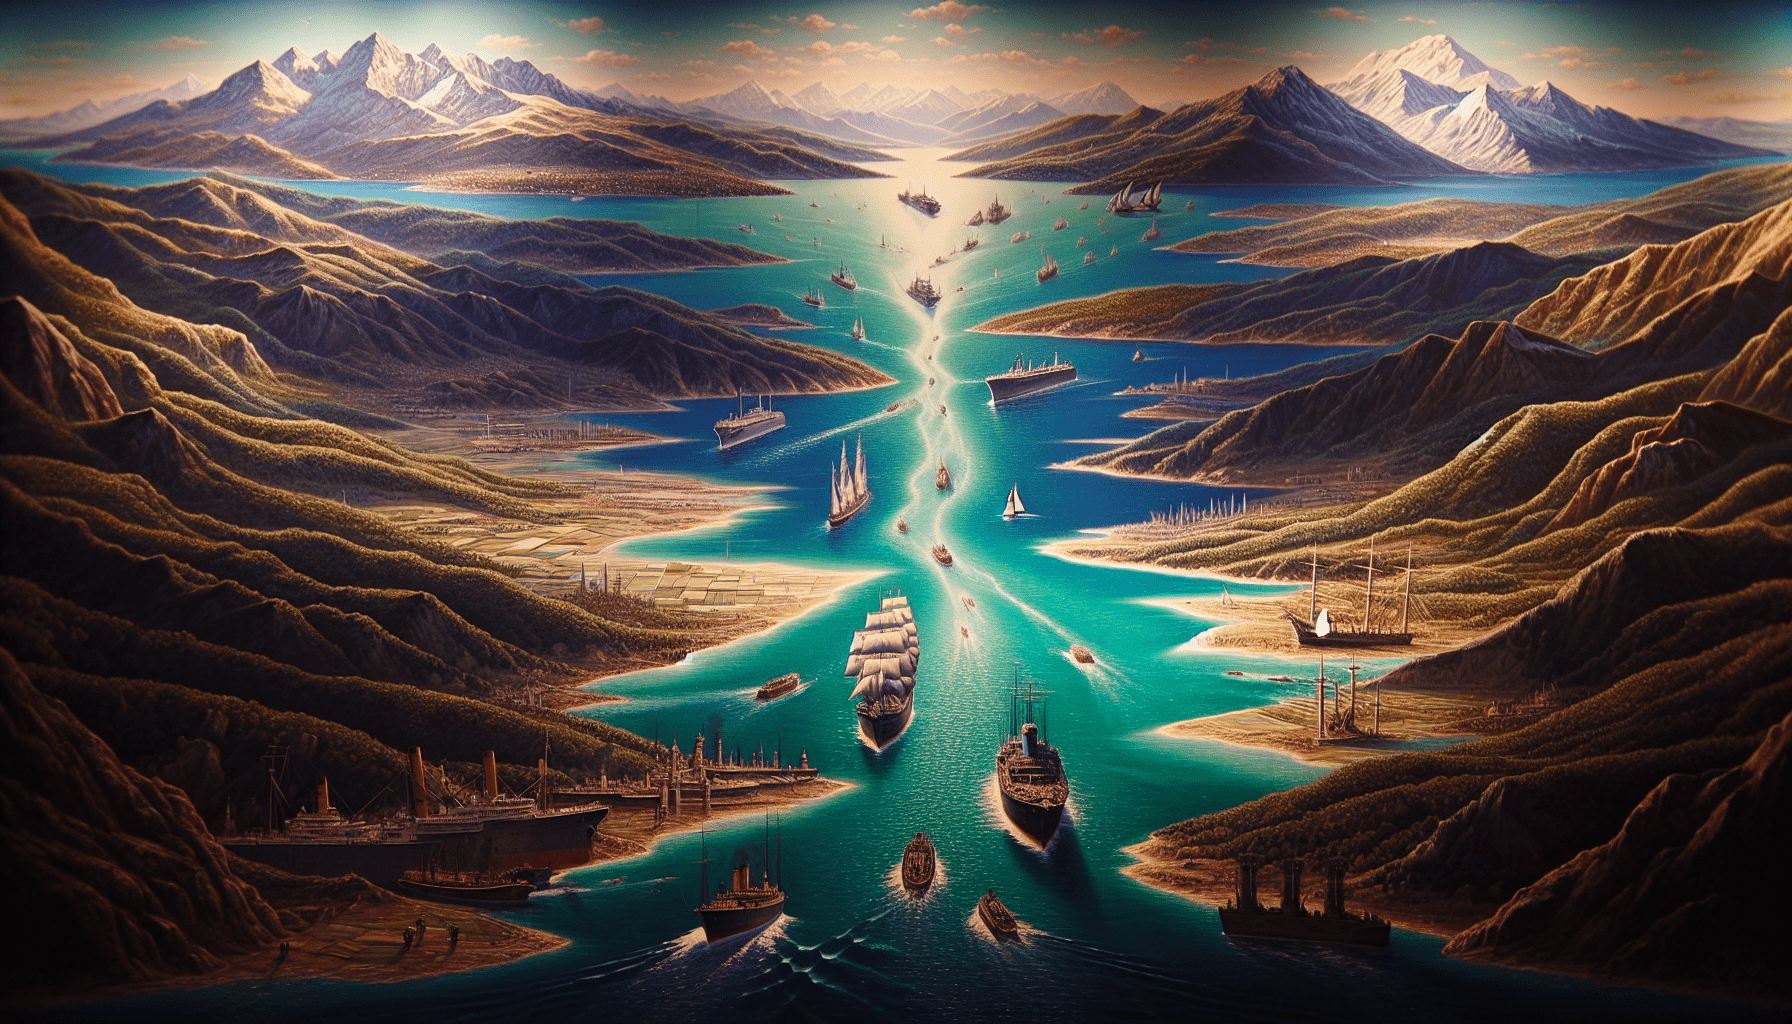 Fantasy landscape of a valley with vibrant green hills and multiple ships sailing on a turquoise river extending towards snowy mountains.